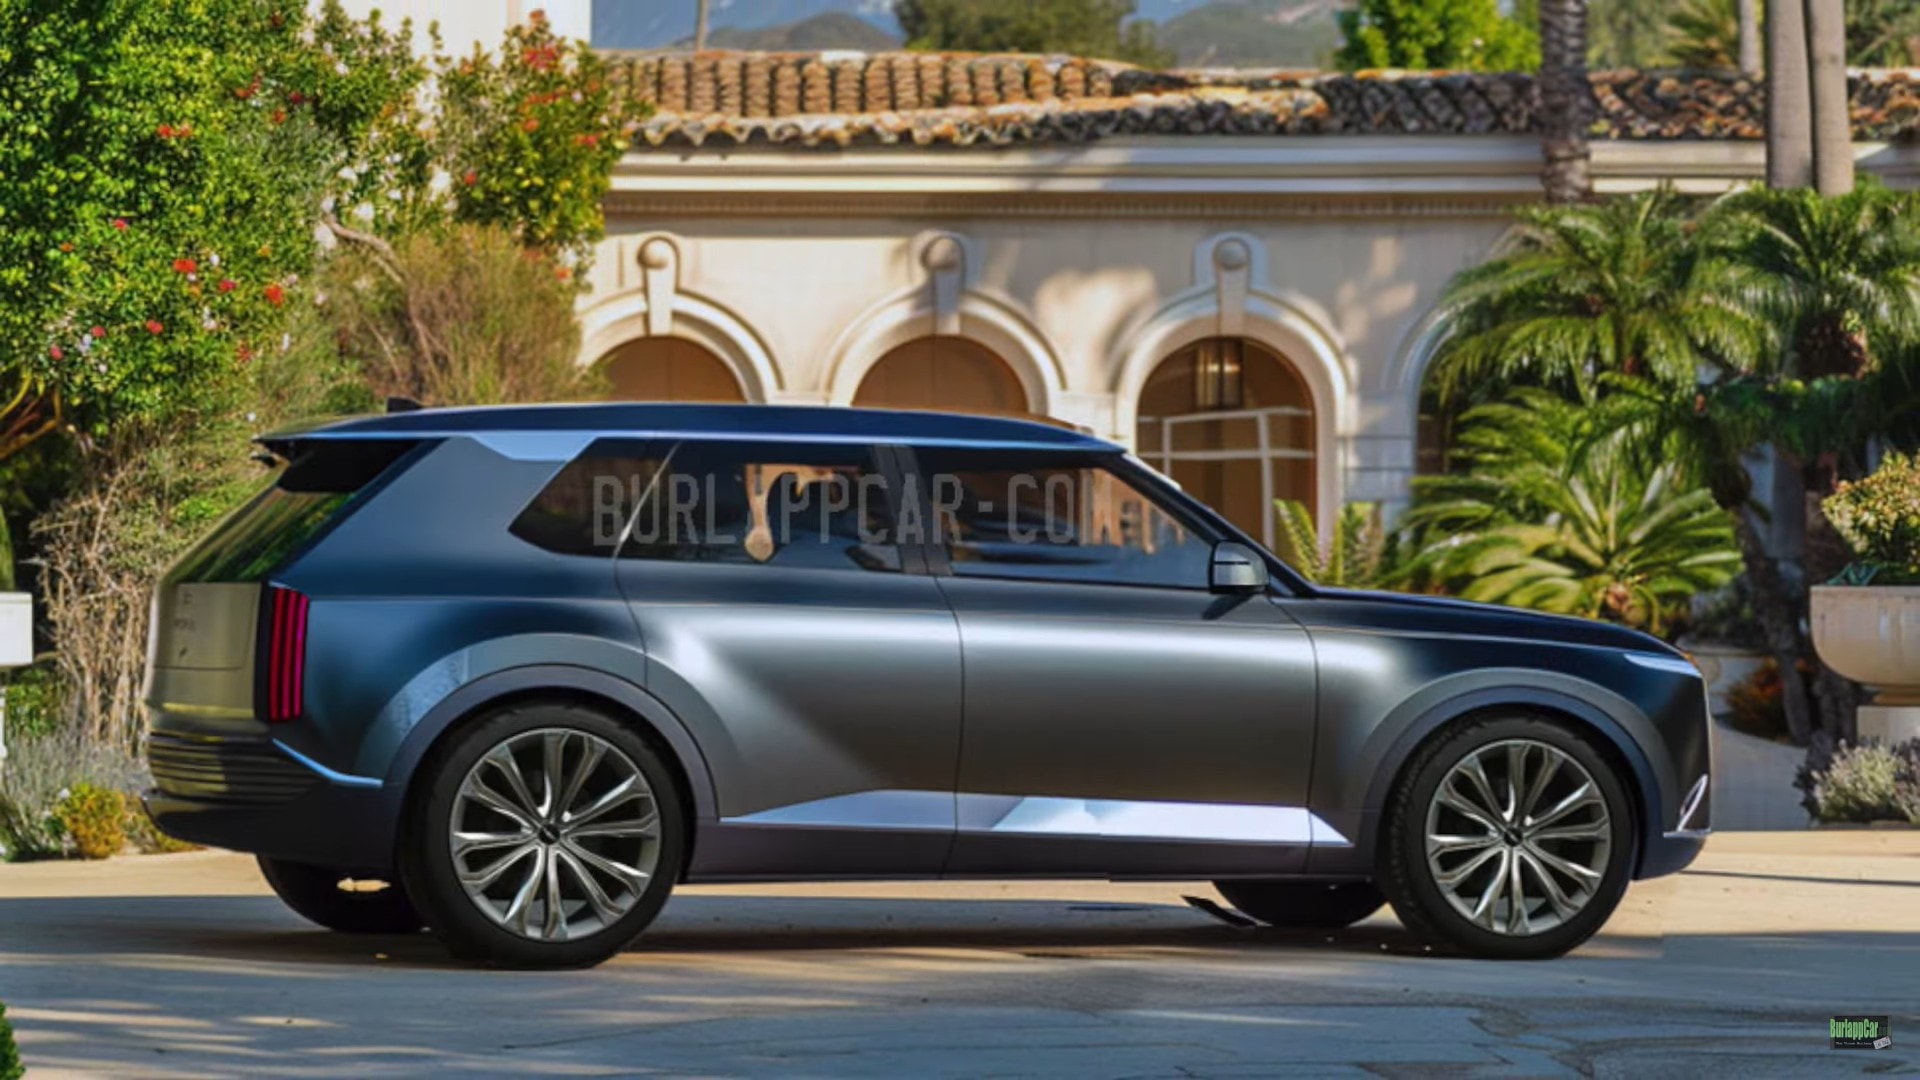 2026-hyundai-palisade-visits-imagination-land-can-t-decide-what-attire-to-wear_1.jpg